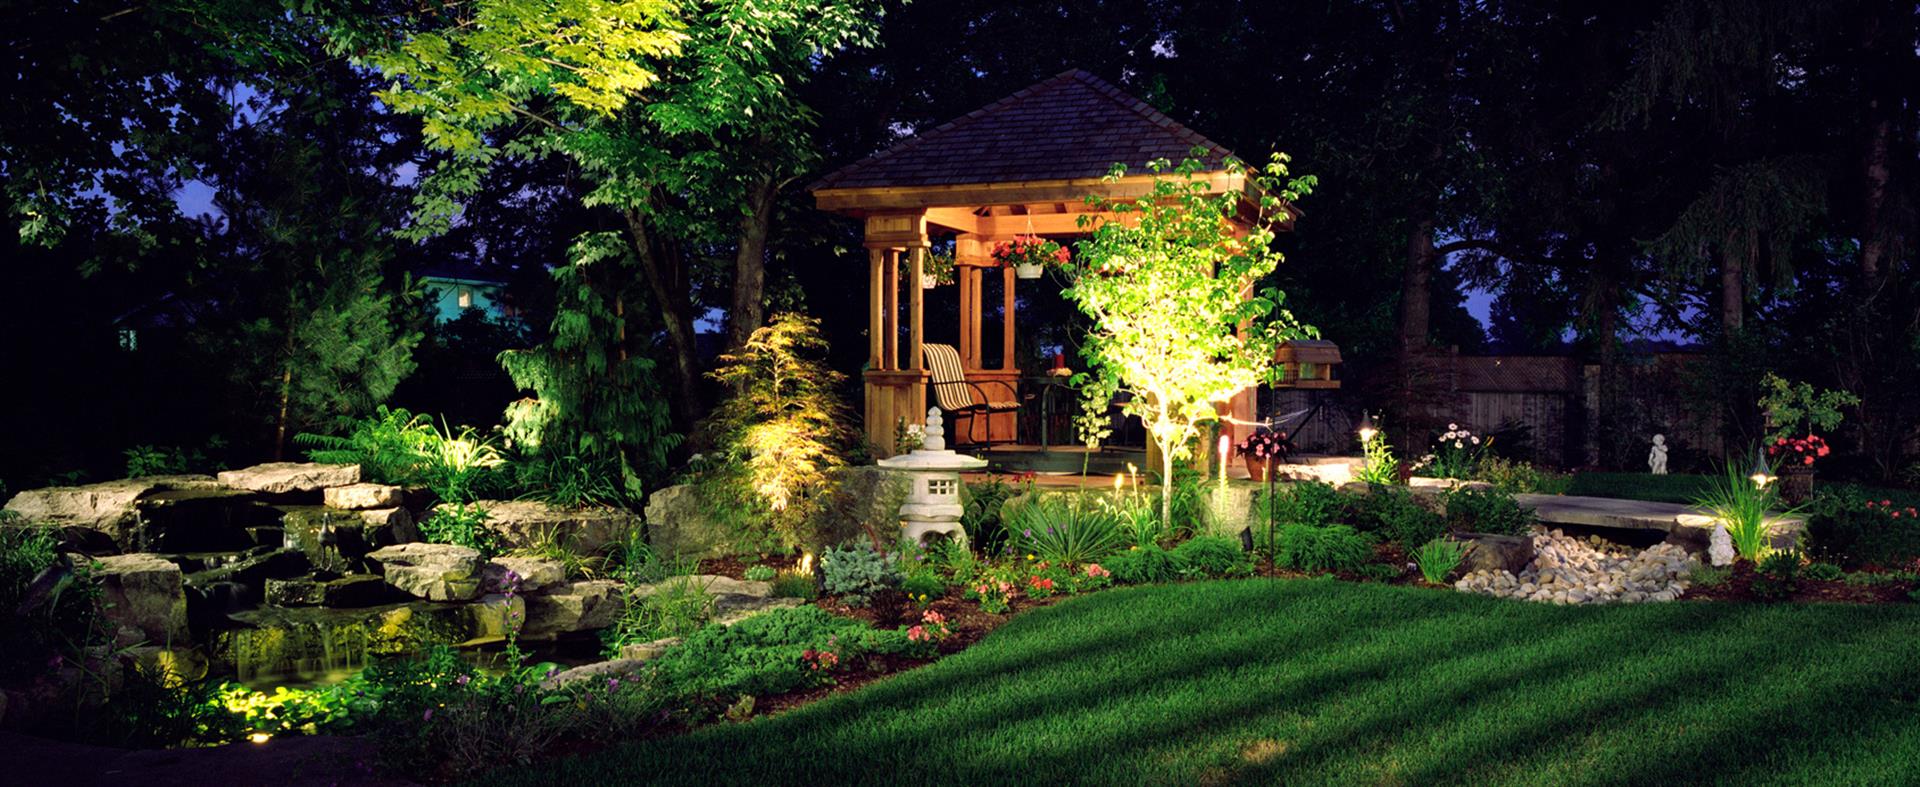 Night Lux takes pride in our landscape lighting designer services, where our skilled professionals conceptualize and create stunning lighting plans tailored to your preferences. Our landscape lighting designers have a keen eye for detail, artistic flair, and technical expertise to craft designs that enhance the architectural and natural elements of your property. Trust Night Lux's landscape lighting designers to turn your outdoor dreams into illuminated reality.